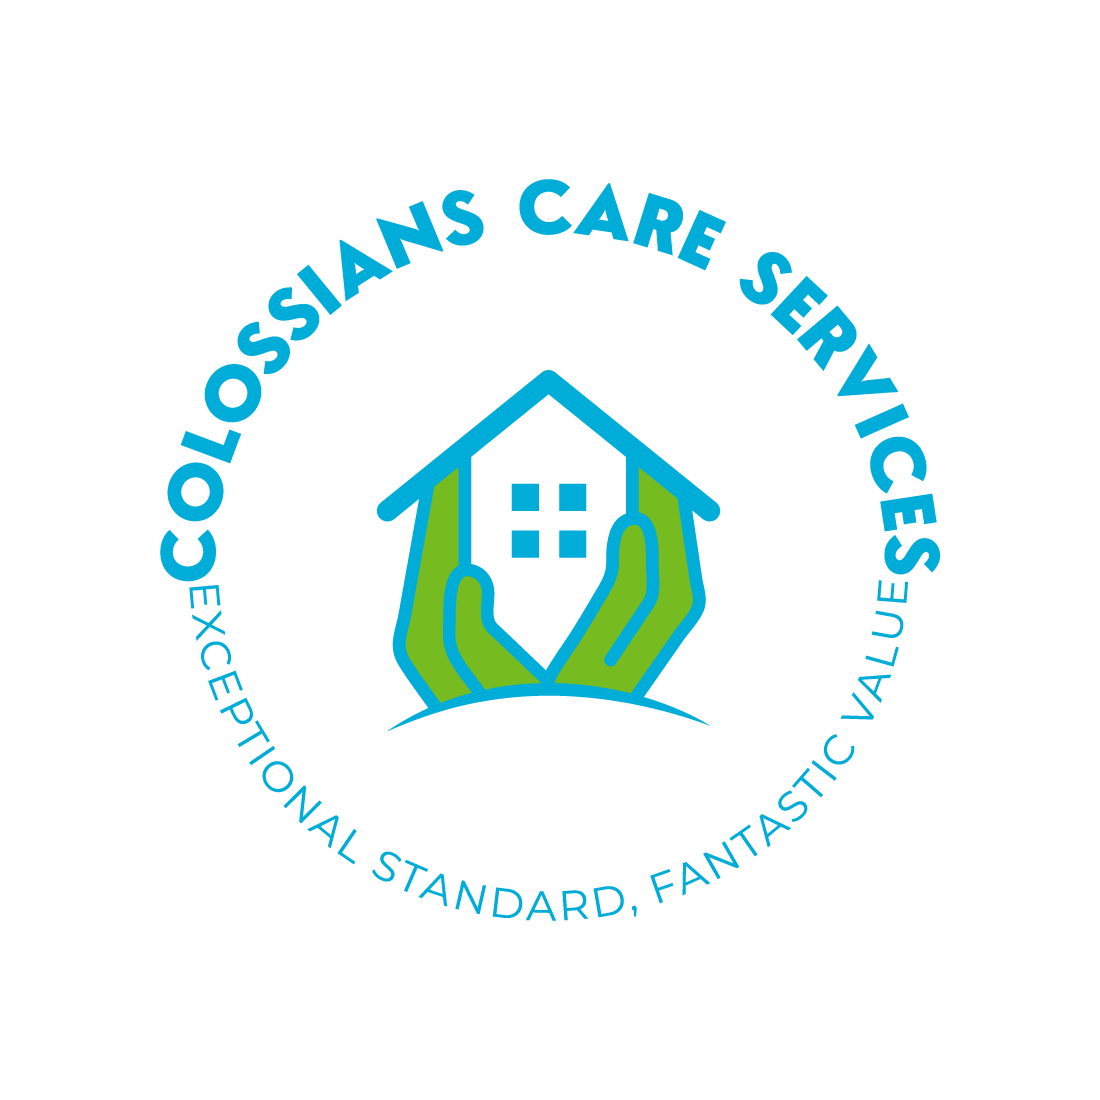 Colossians Care Services Limited